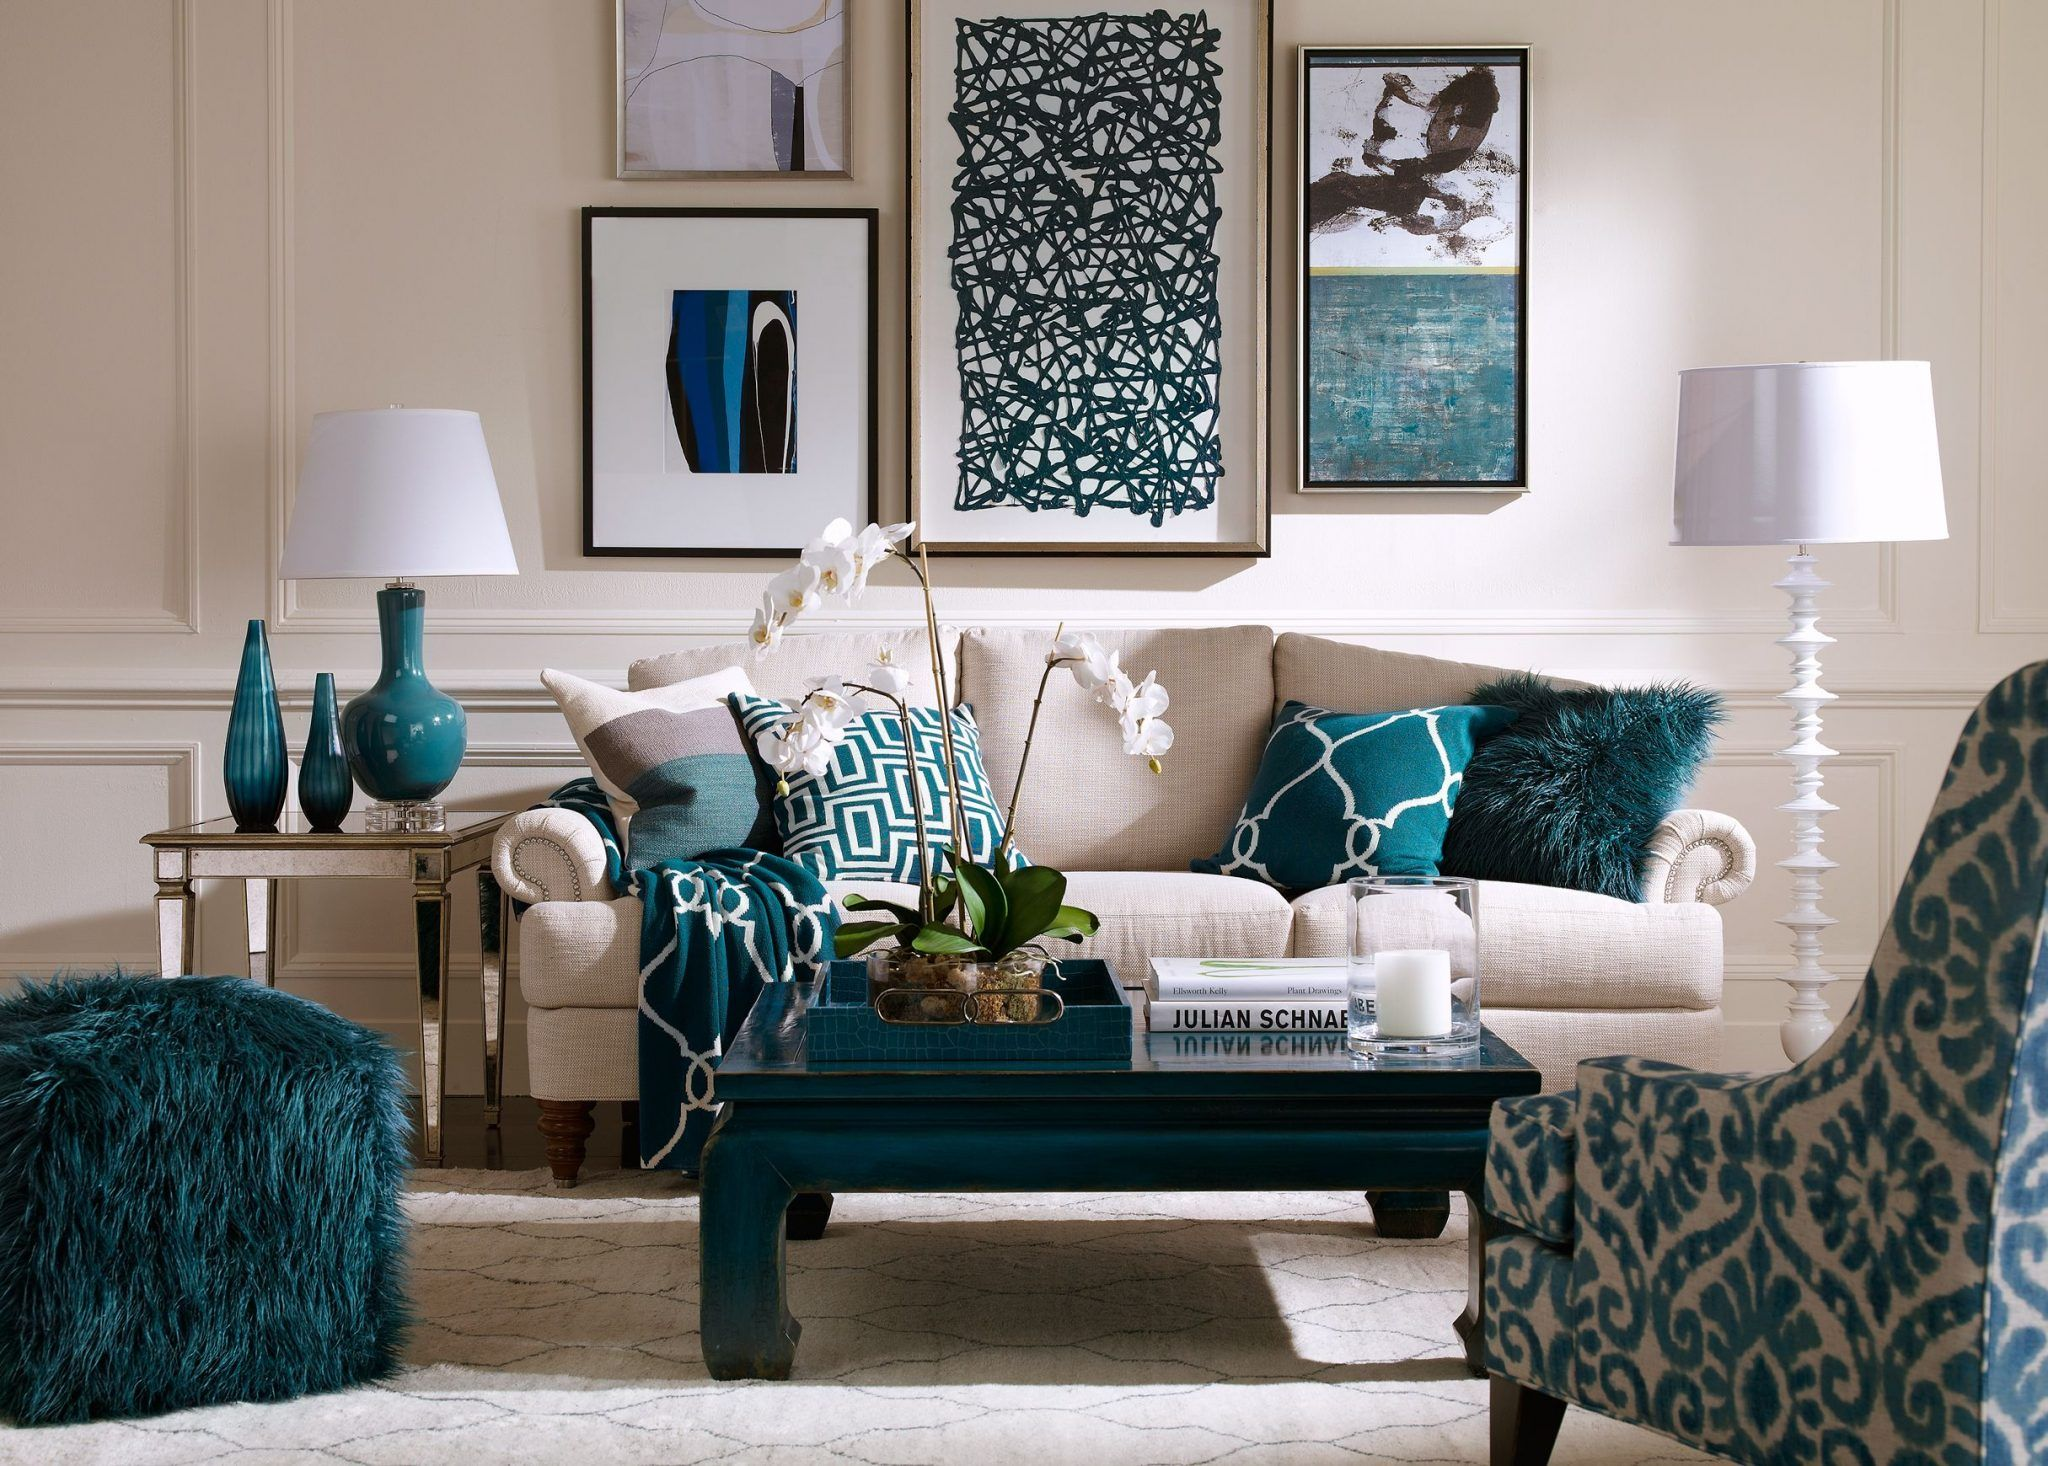 Beige walls and teal paint color